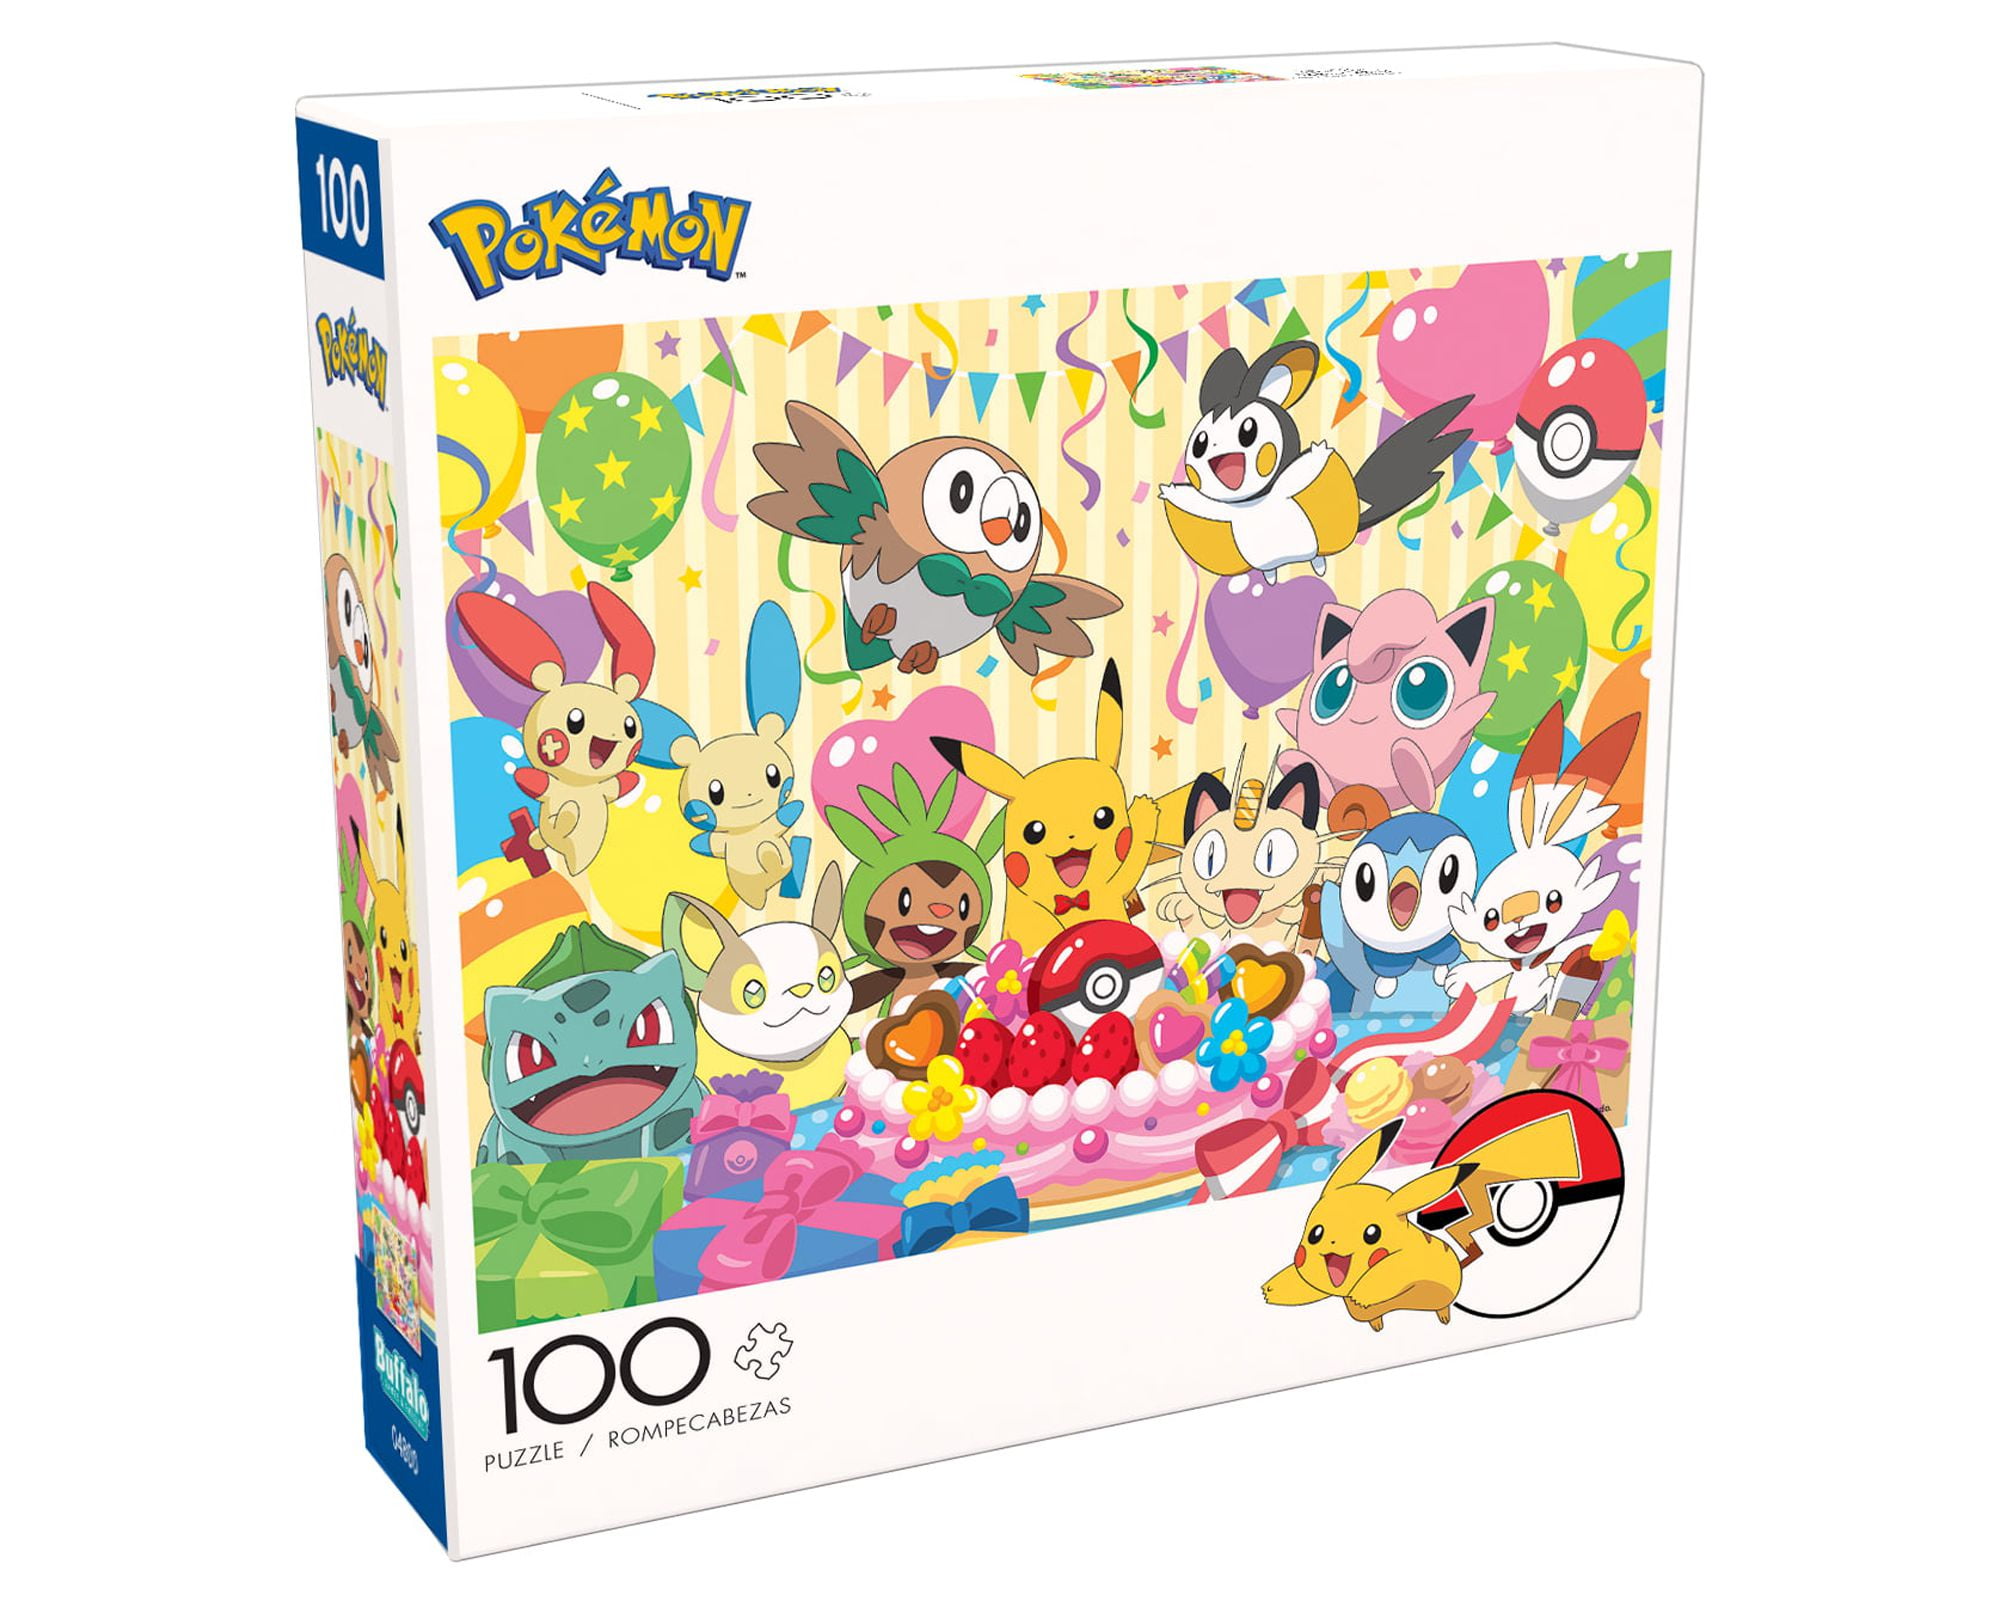  Buffalo Games - Pokemon - Pikachu and Eevee Spring - 100 Piece  Jigsaw Puzzle for Families Challenging Puzzle Perfect for Family Time - 100  Piece Finished Size is 15.00 x 11.00 : Toys & Games